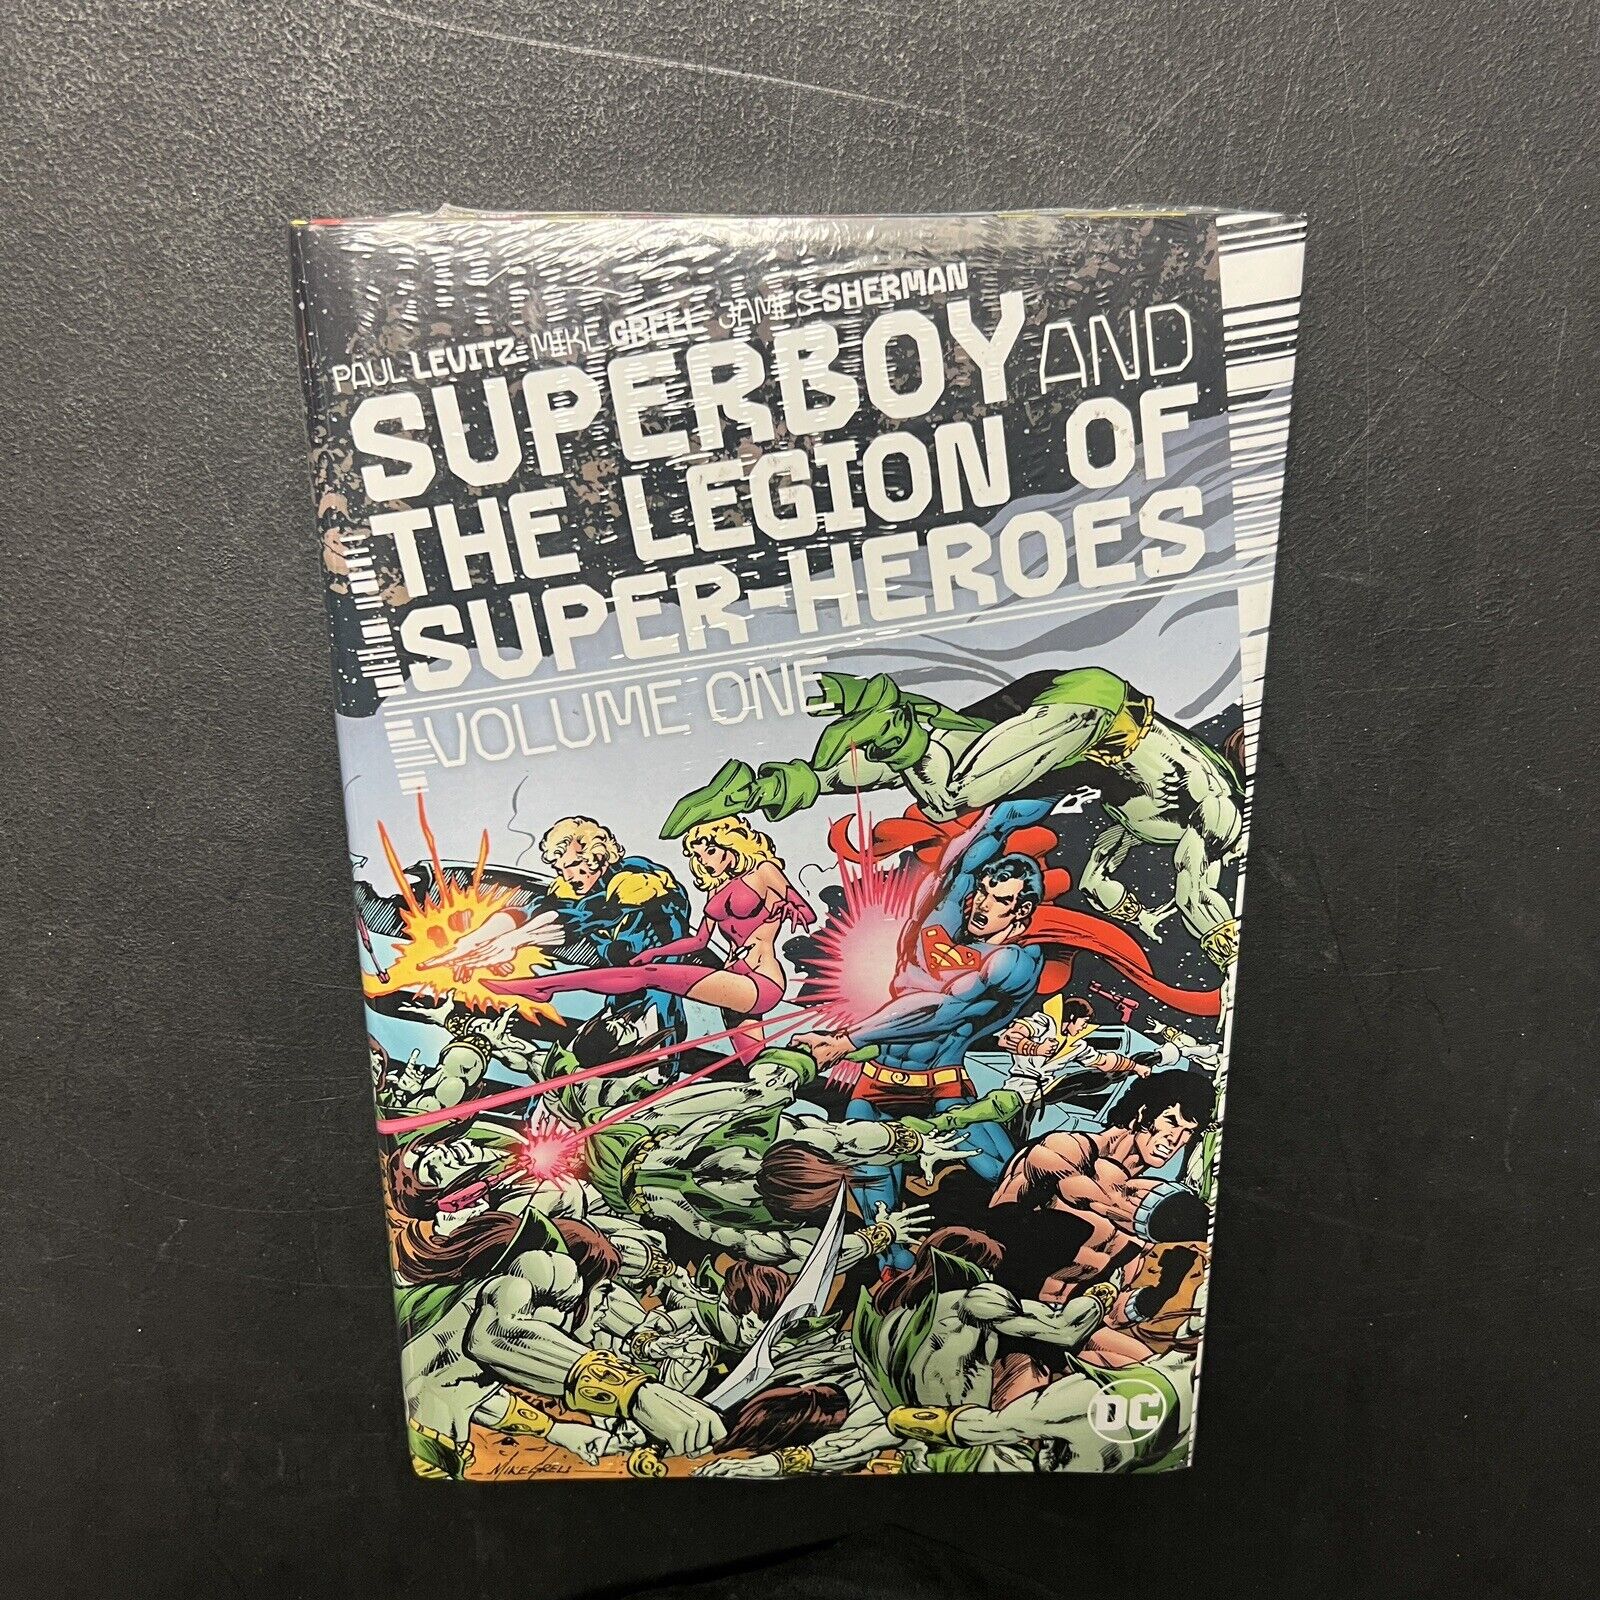 Superboy and the Legion of Super-Heroes Vol 1 DC Comics Hardcover Sealed New